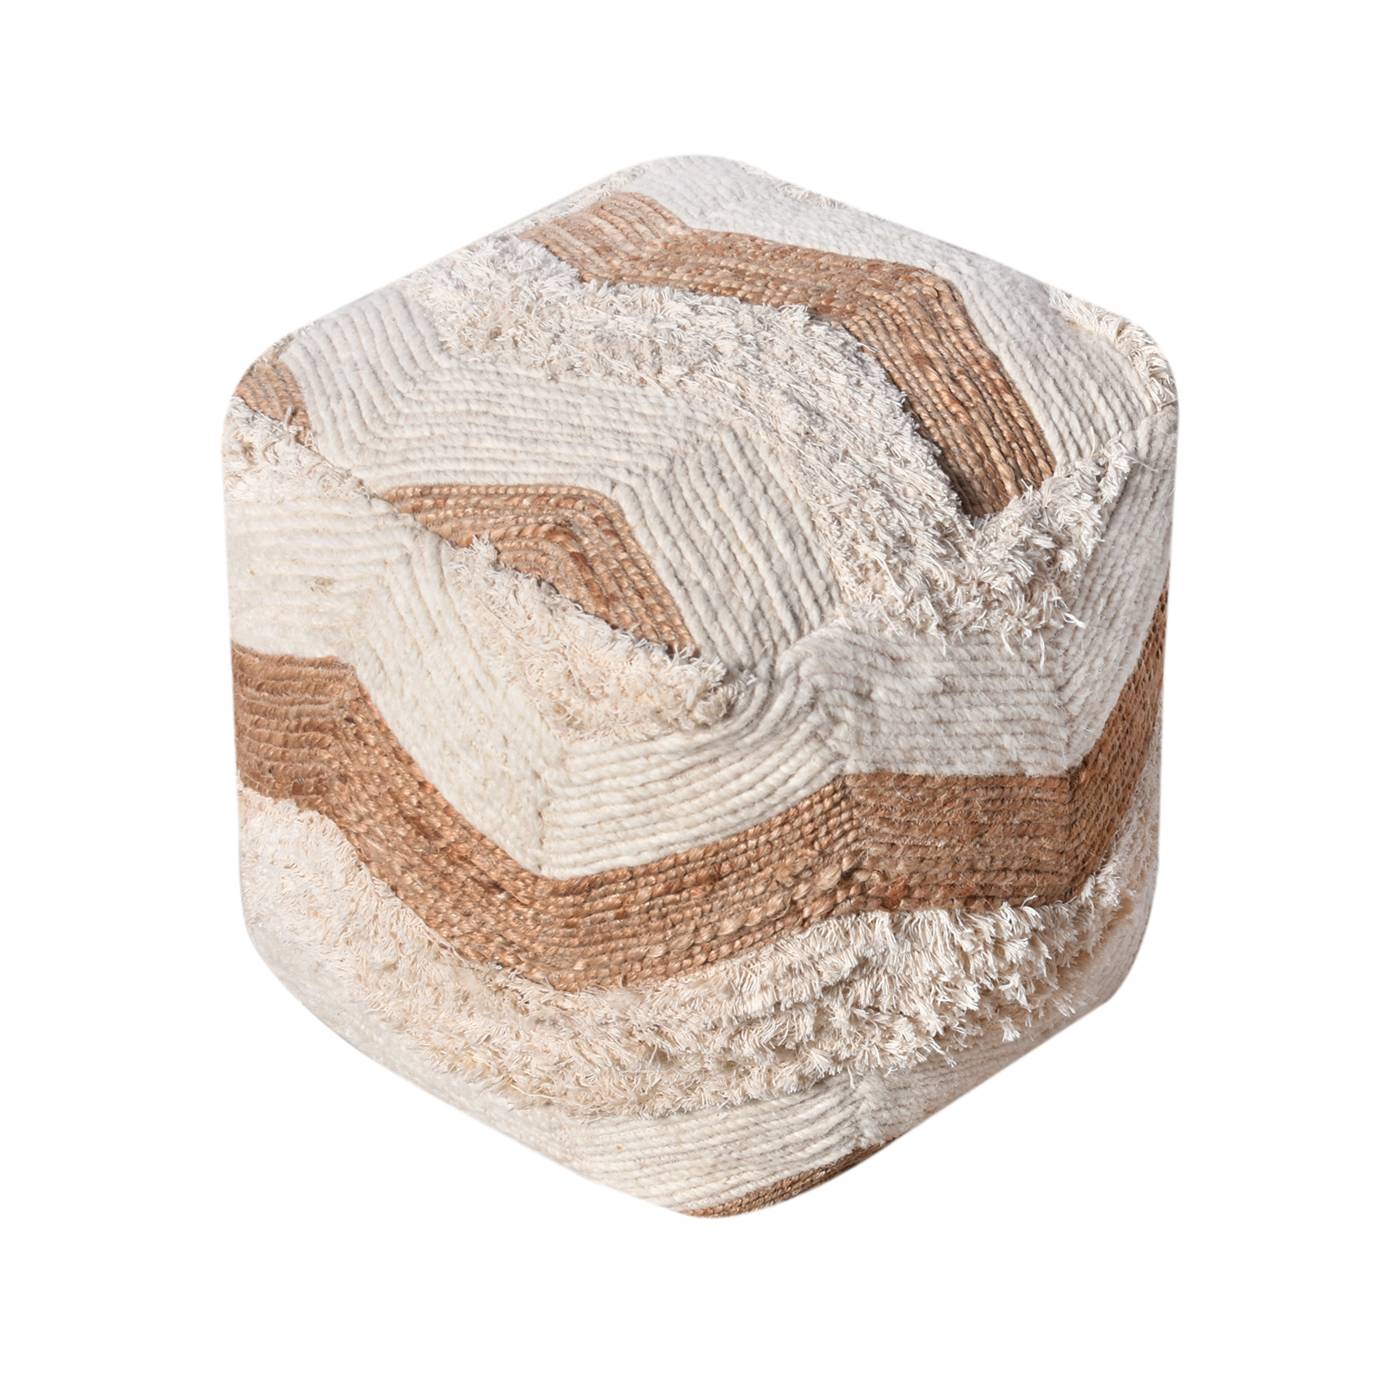 Olaine Pouf, 40x40x40 cm, Natural White, Natural, Wool, Jute, Cotton Salvage, Hand Made, Hm Stitching, Flat Weave